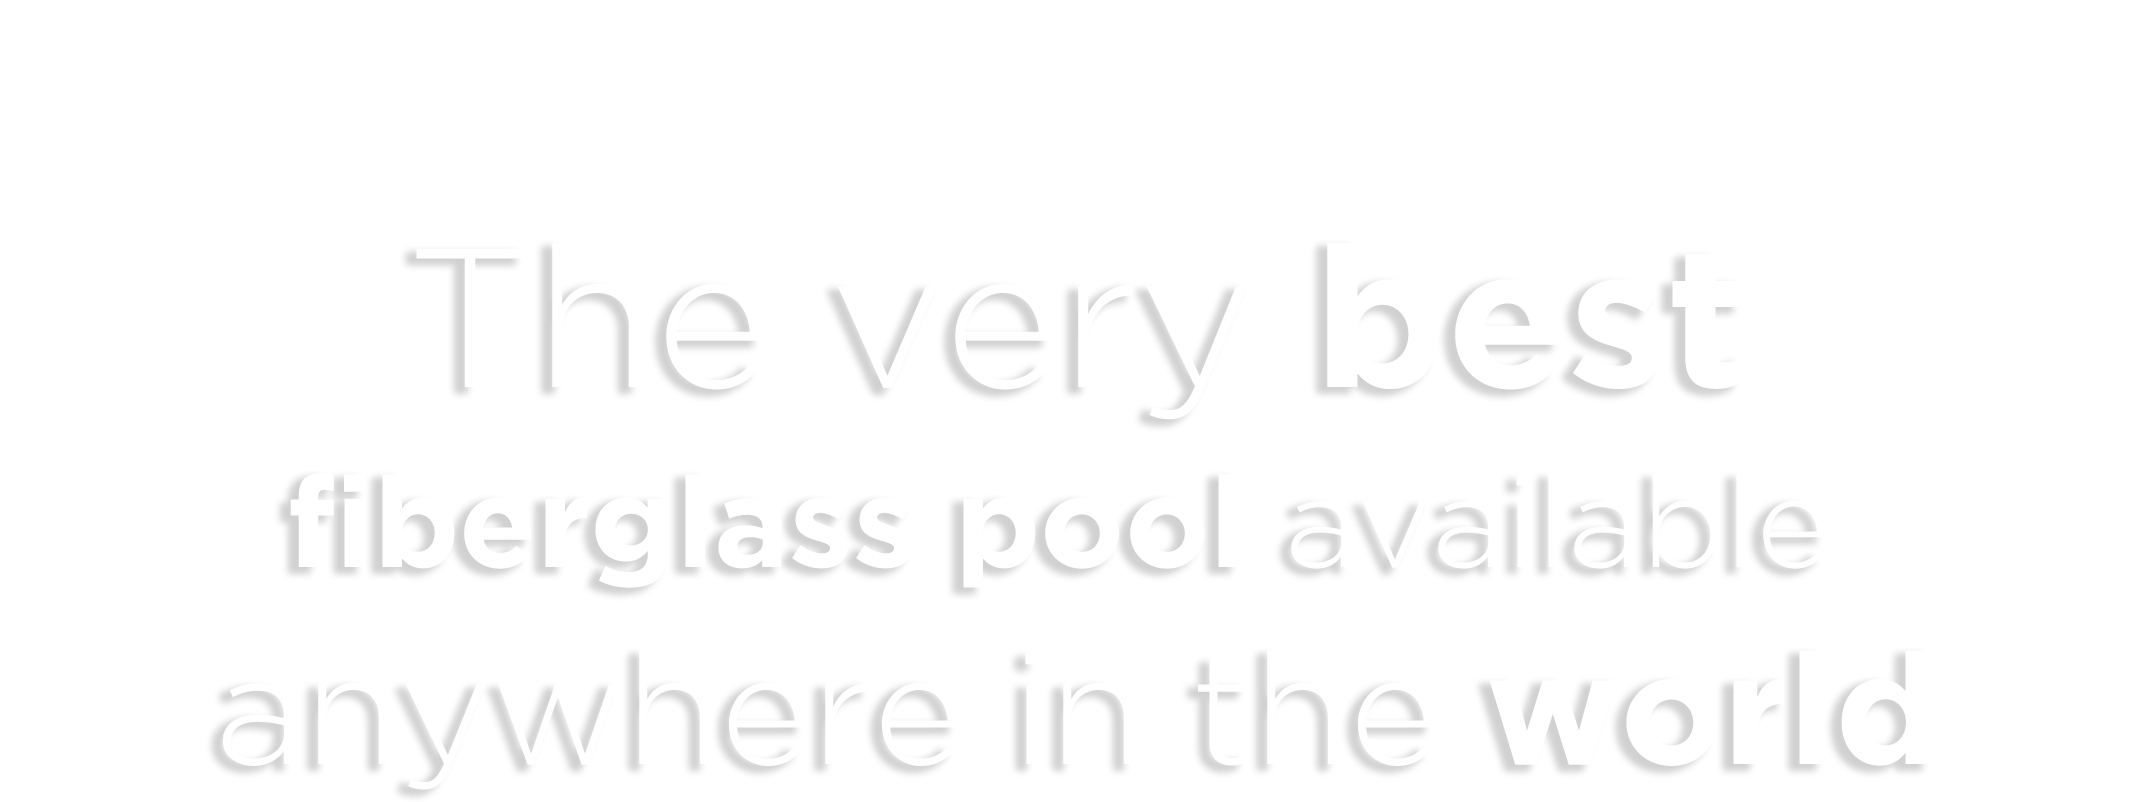 The very best fiberglass swimming pool available anywhere in the world